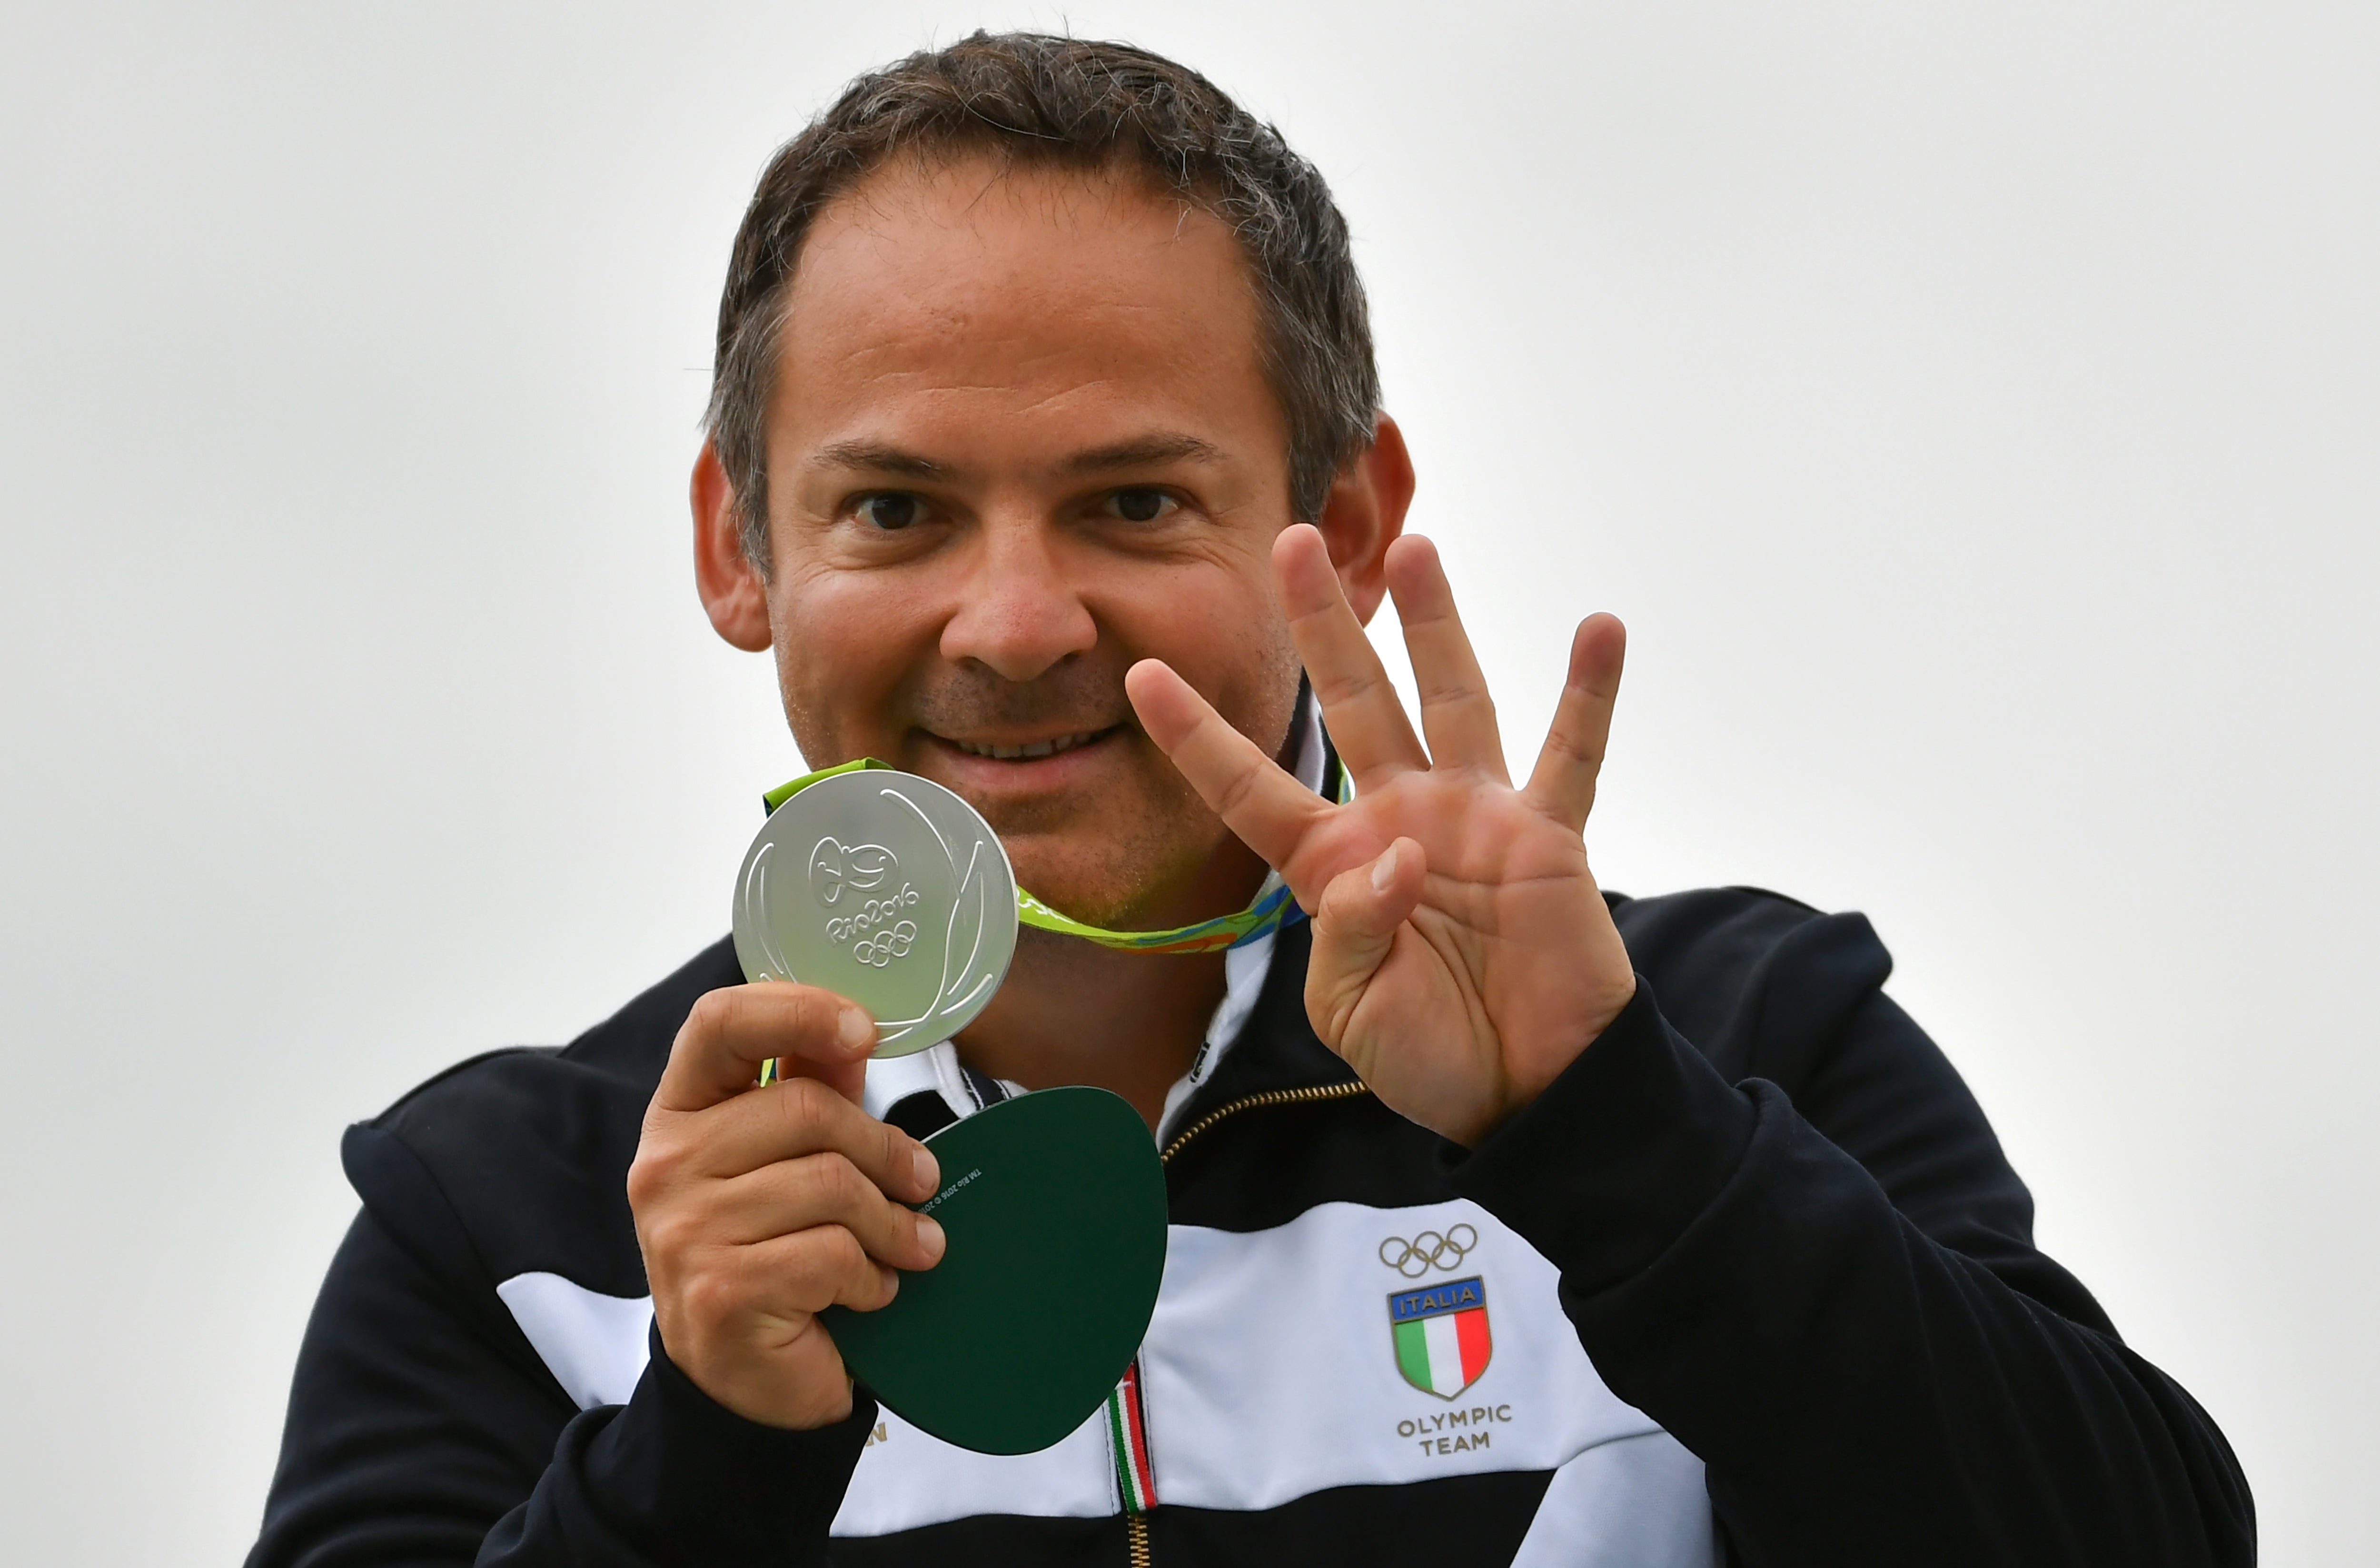 Pellielo celebrates his silver medal on the podium at the Rio 2016 Olympic Games